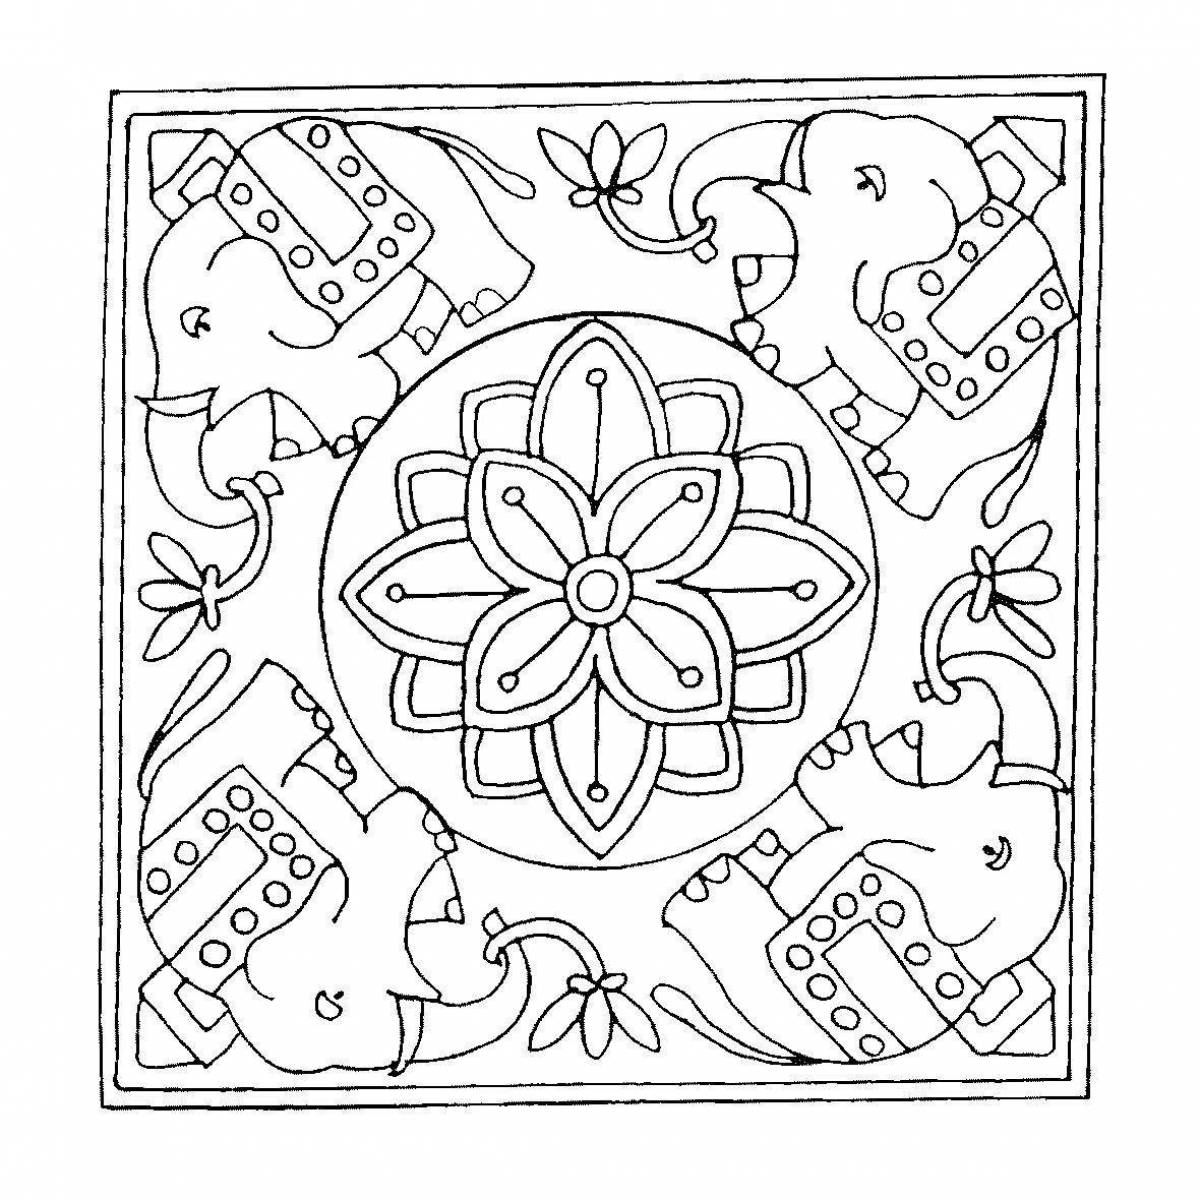 Coloring page charming Russian folk scarf